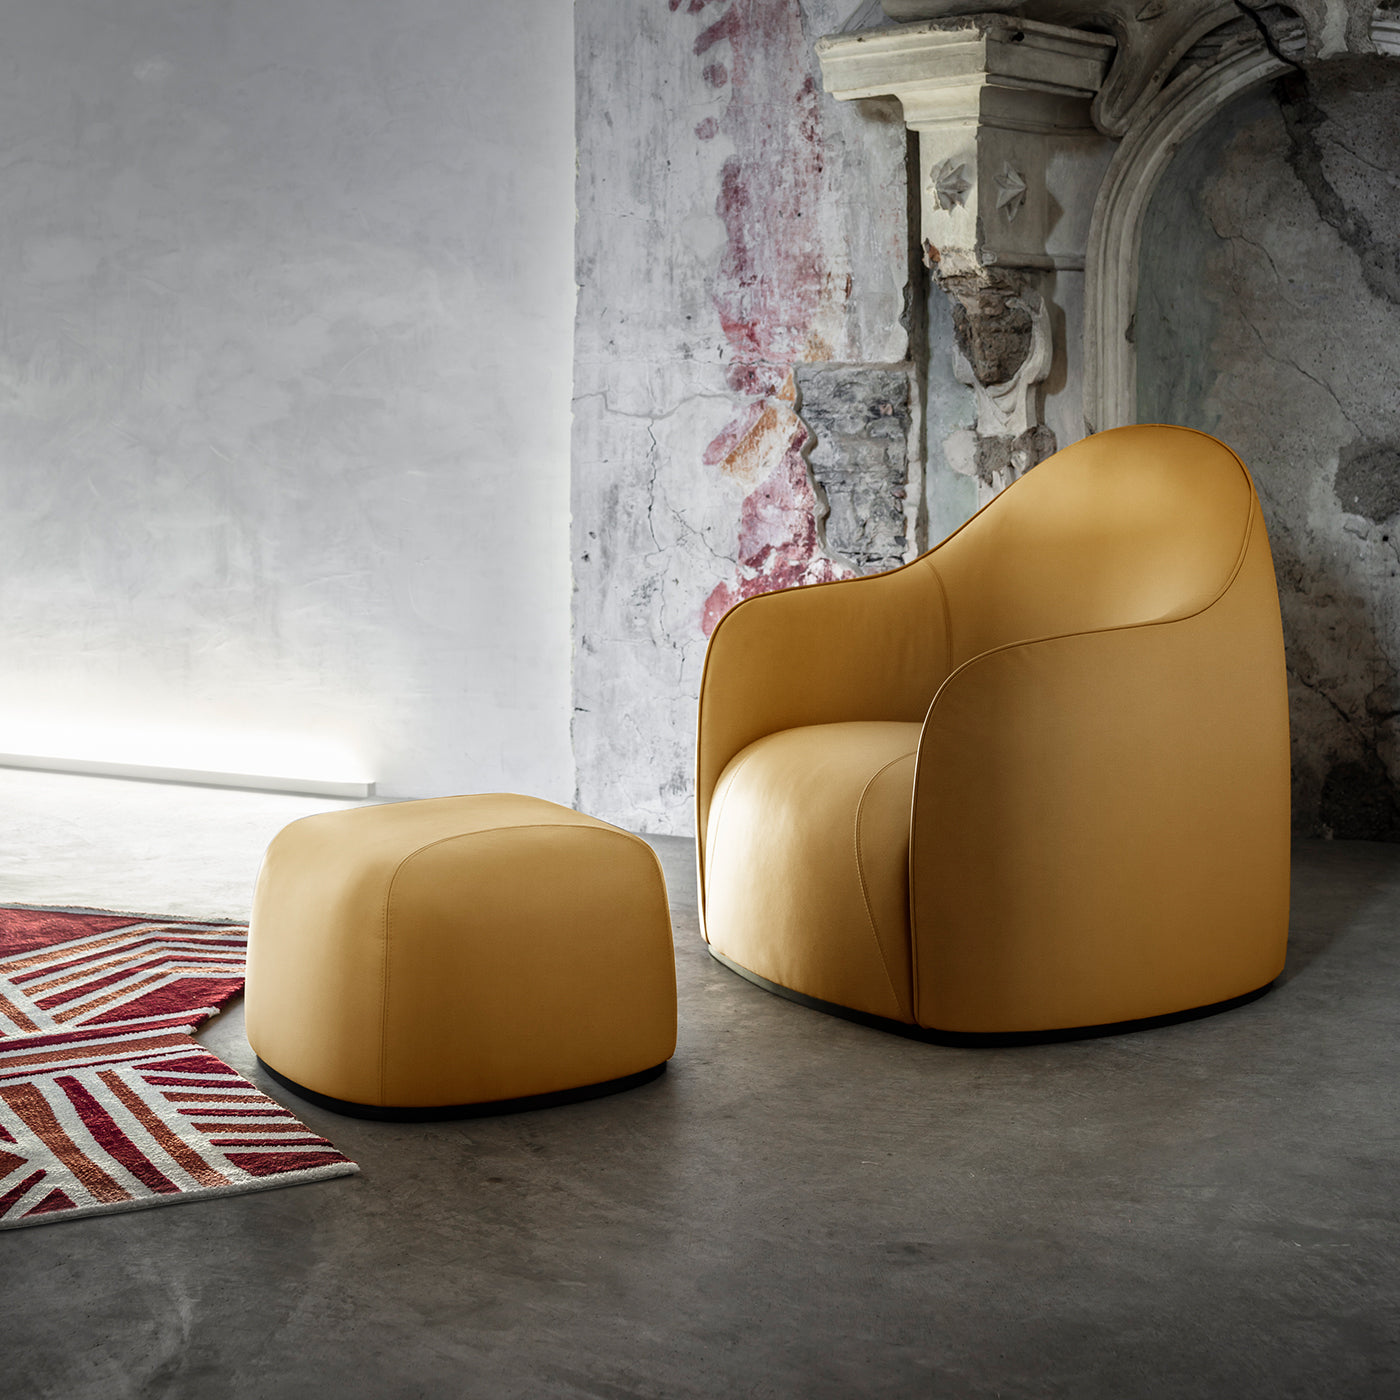 Sweet Set of Mustard Armchair and Pouf by Elisa Giovannoni - Alternative view 4